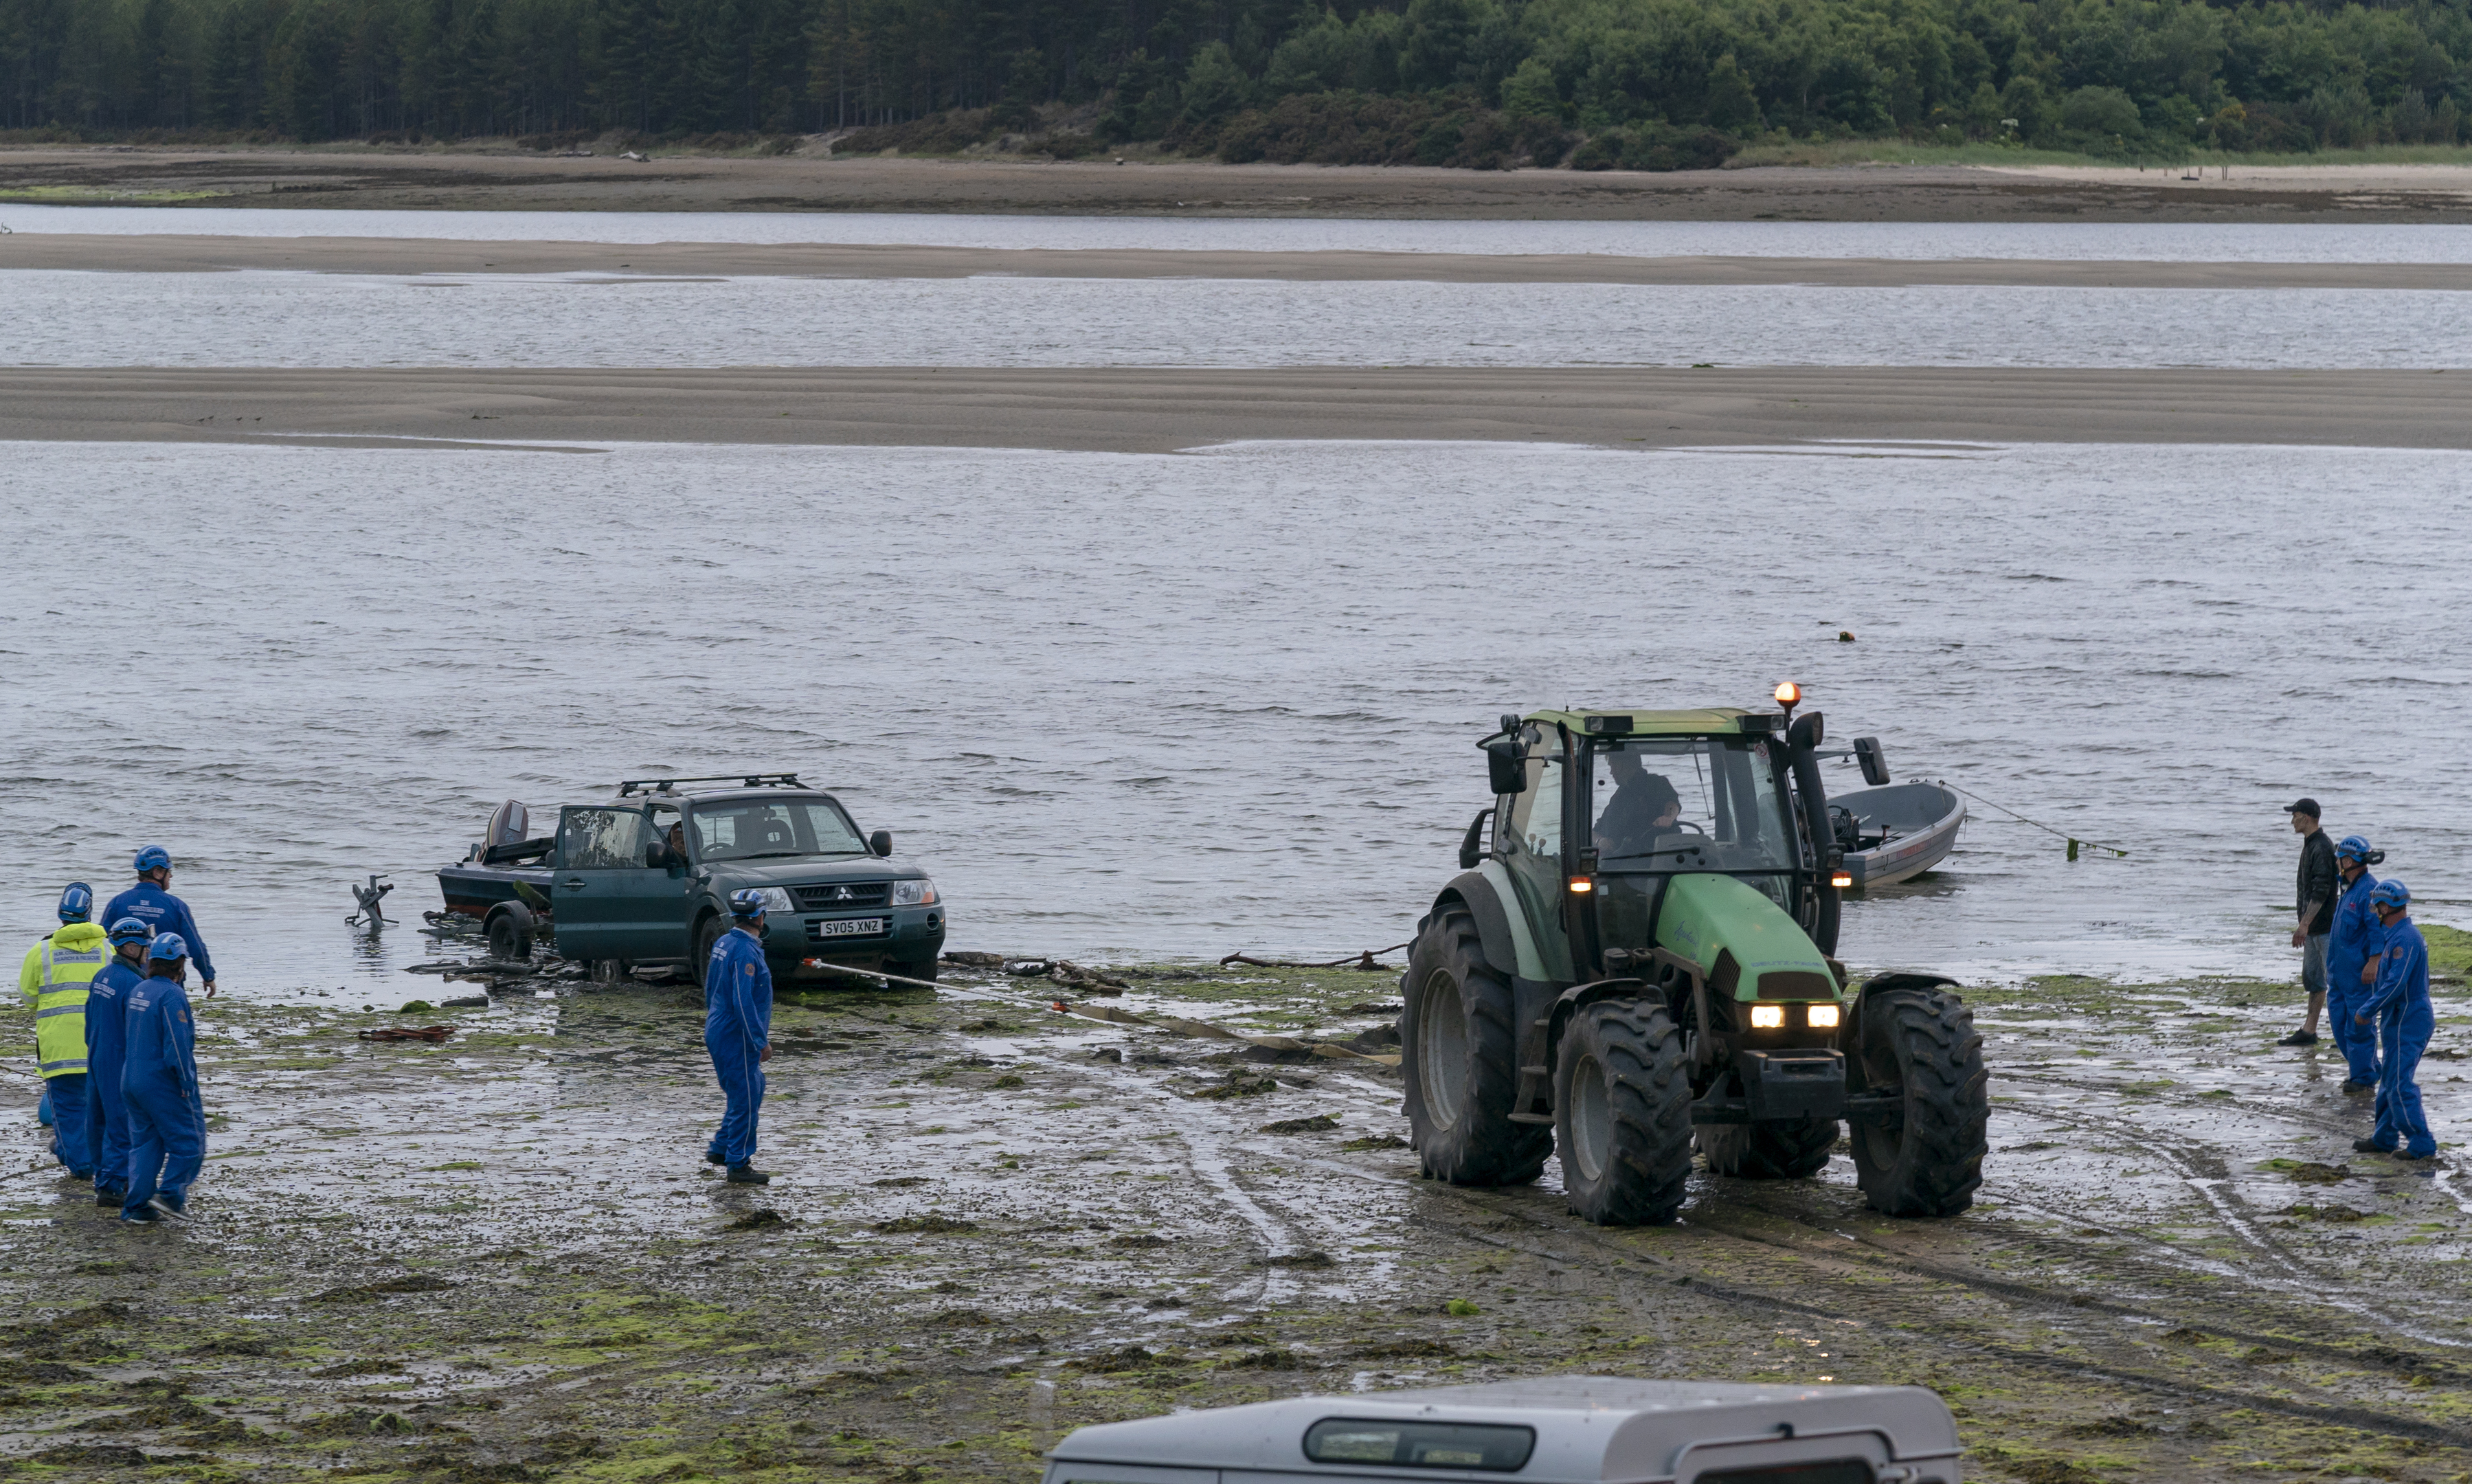 A local farmer had to use his tractor to free the Mitsubishi Shogun from the muddy sands at Findhorn Bay.